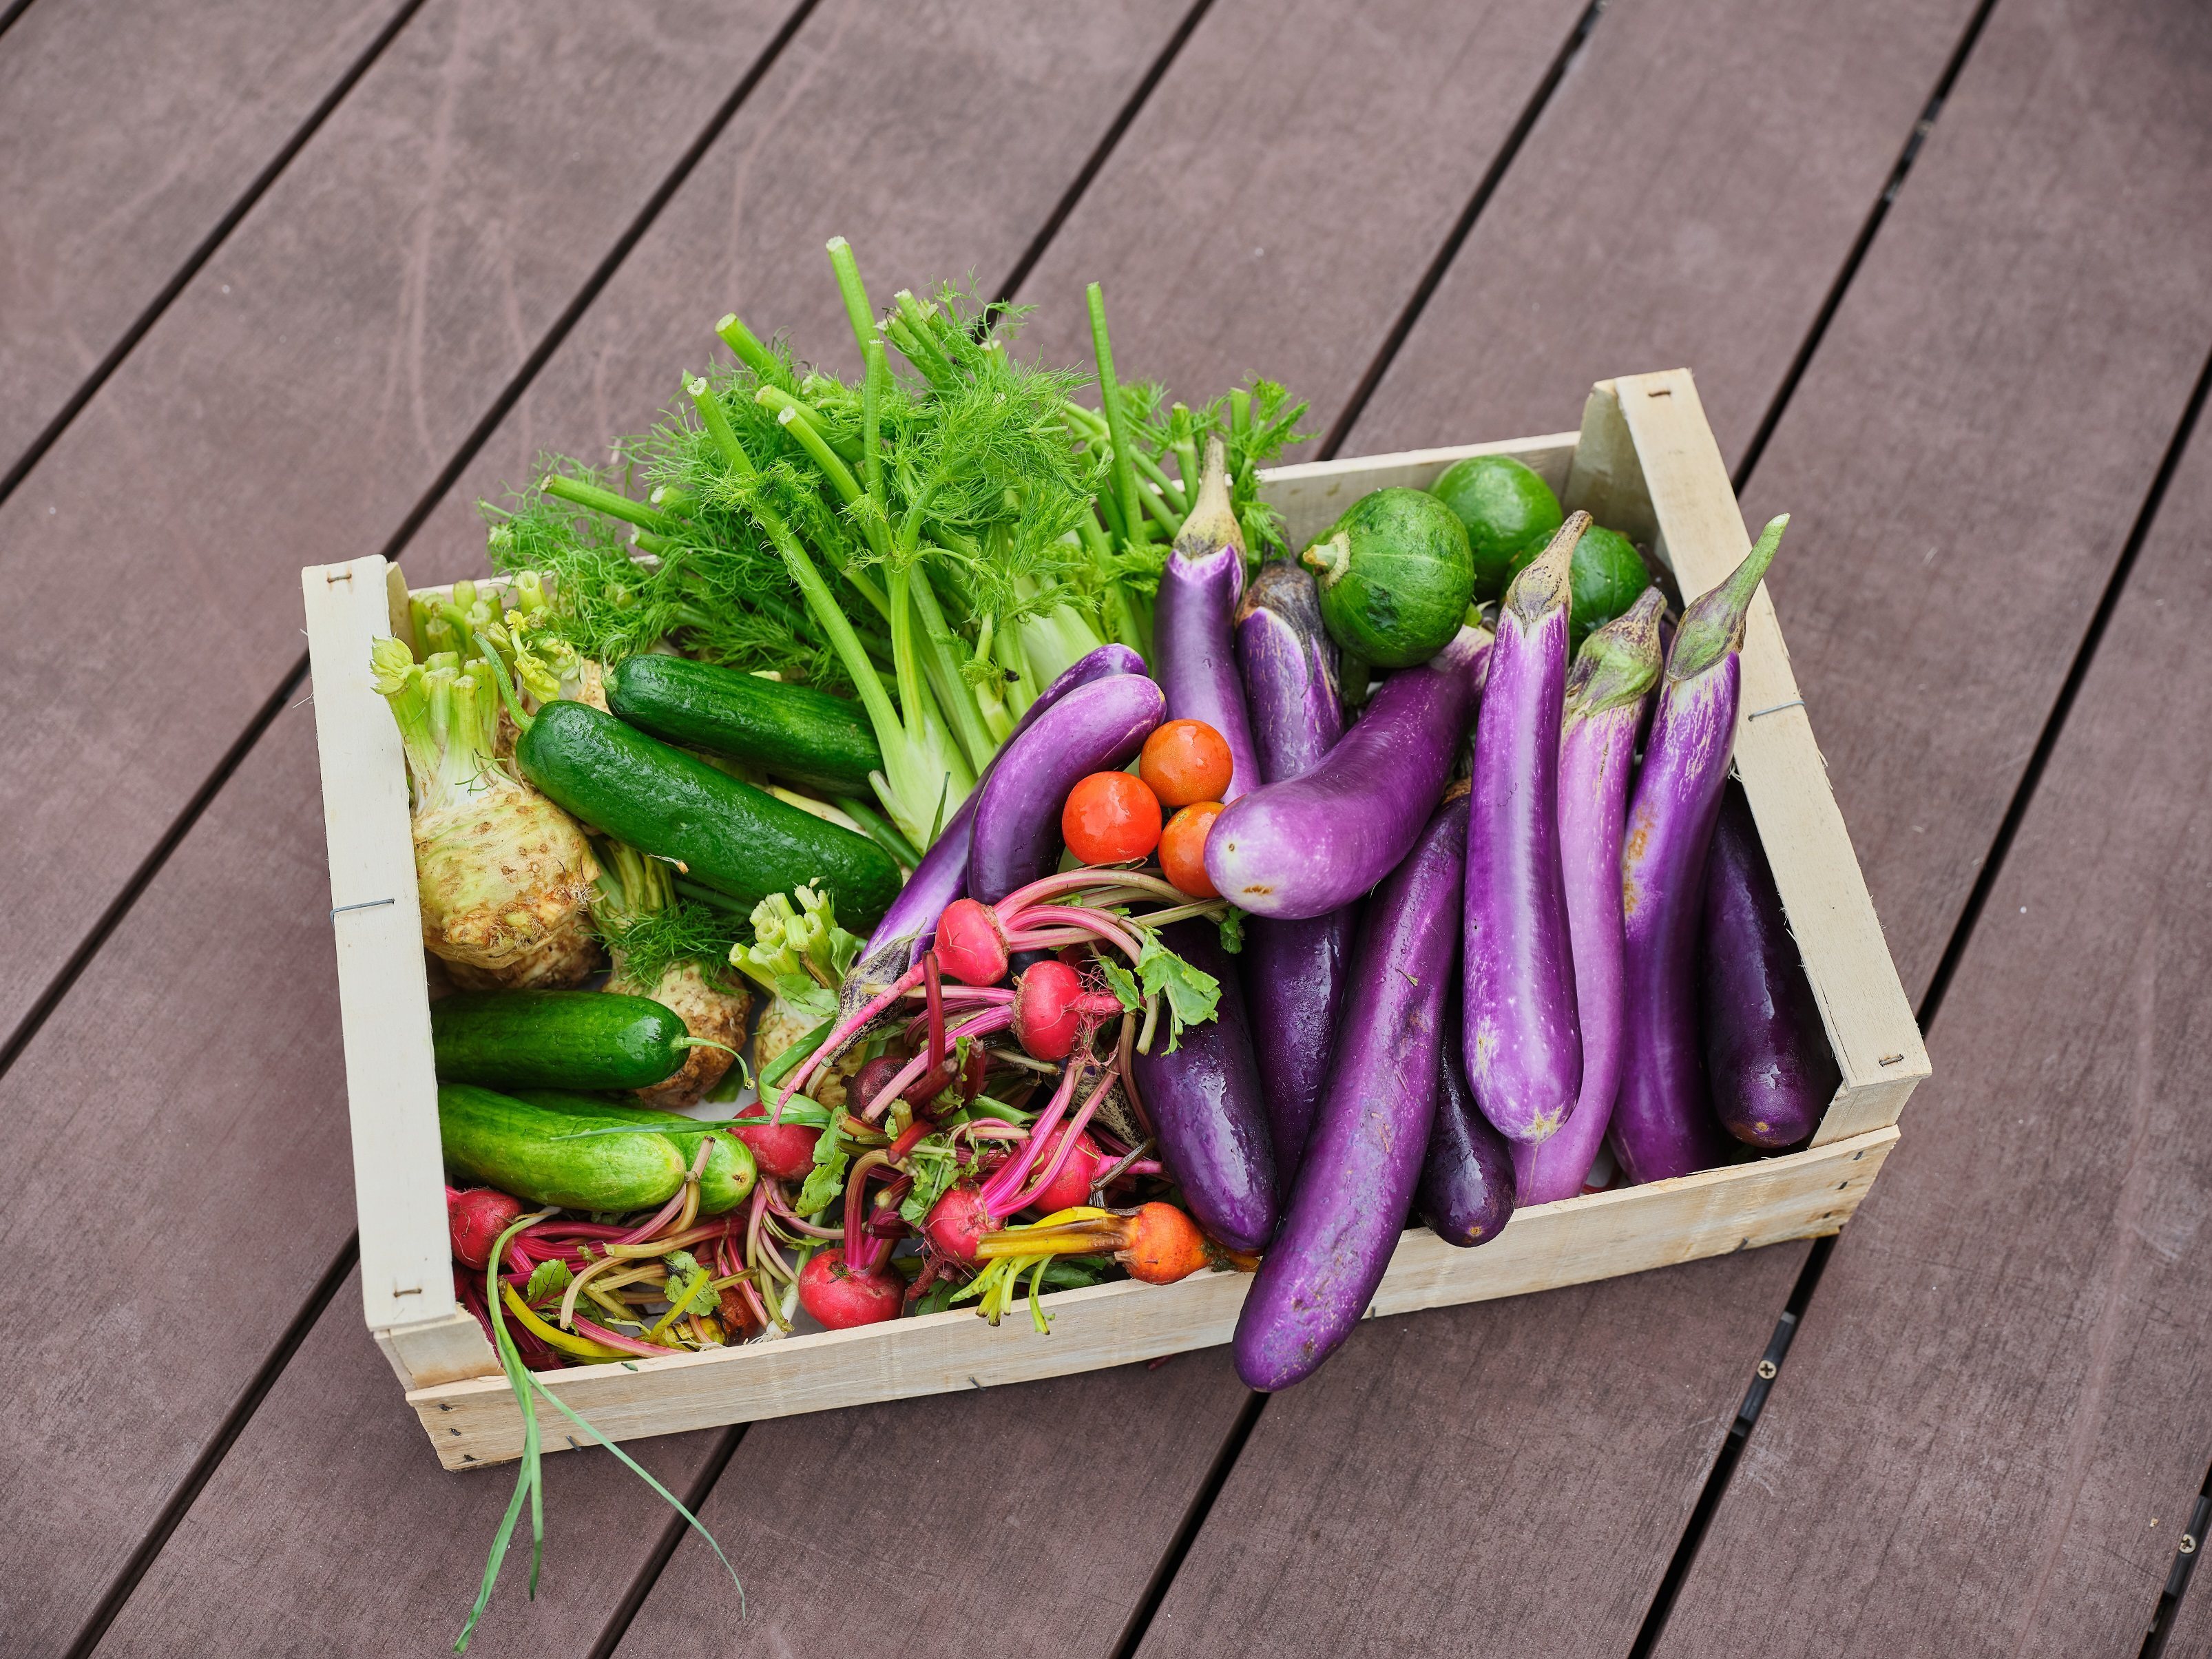 A harvest from farm-to-table restaurant Skye Roofbar & Dining’s rooftop garden in Hong Kong. Photo: Handout